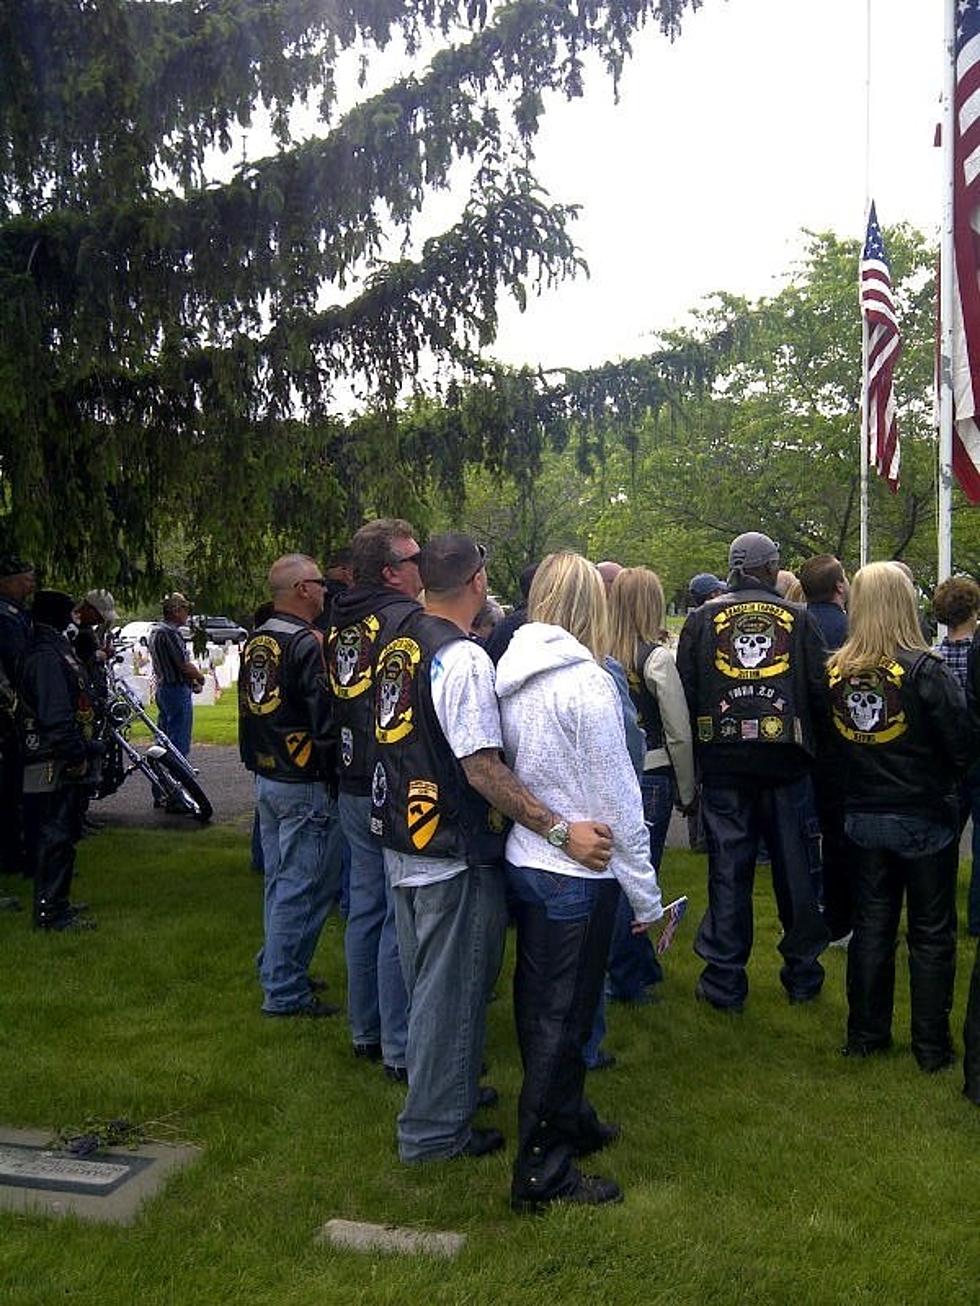 Memorial Day 2011, The True Meaning [PHOTOS]